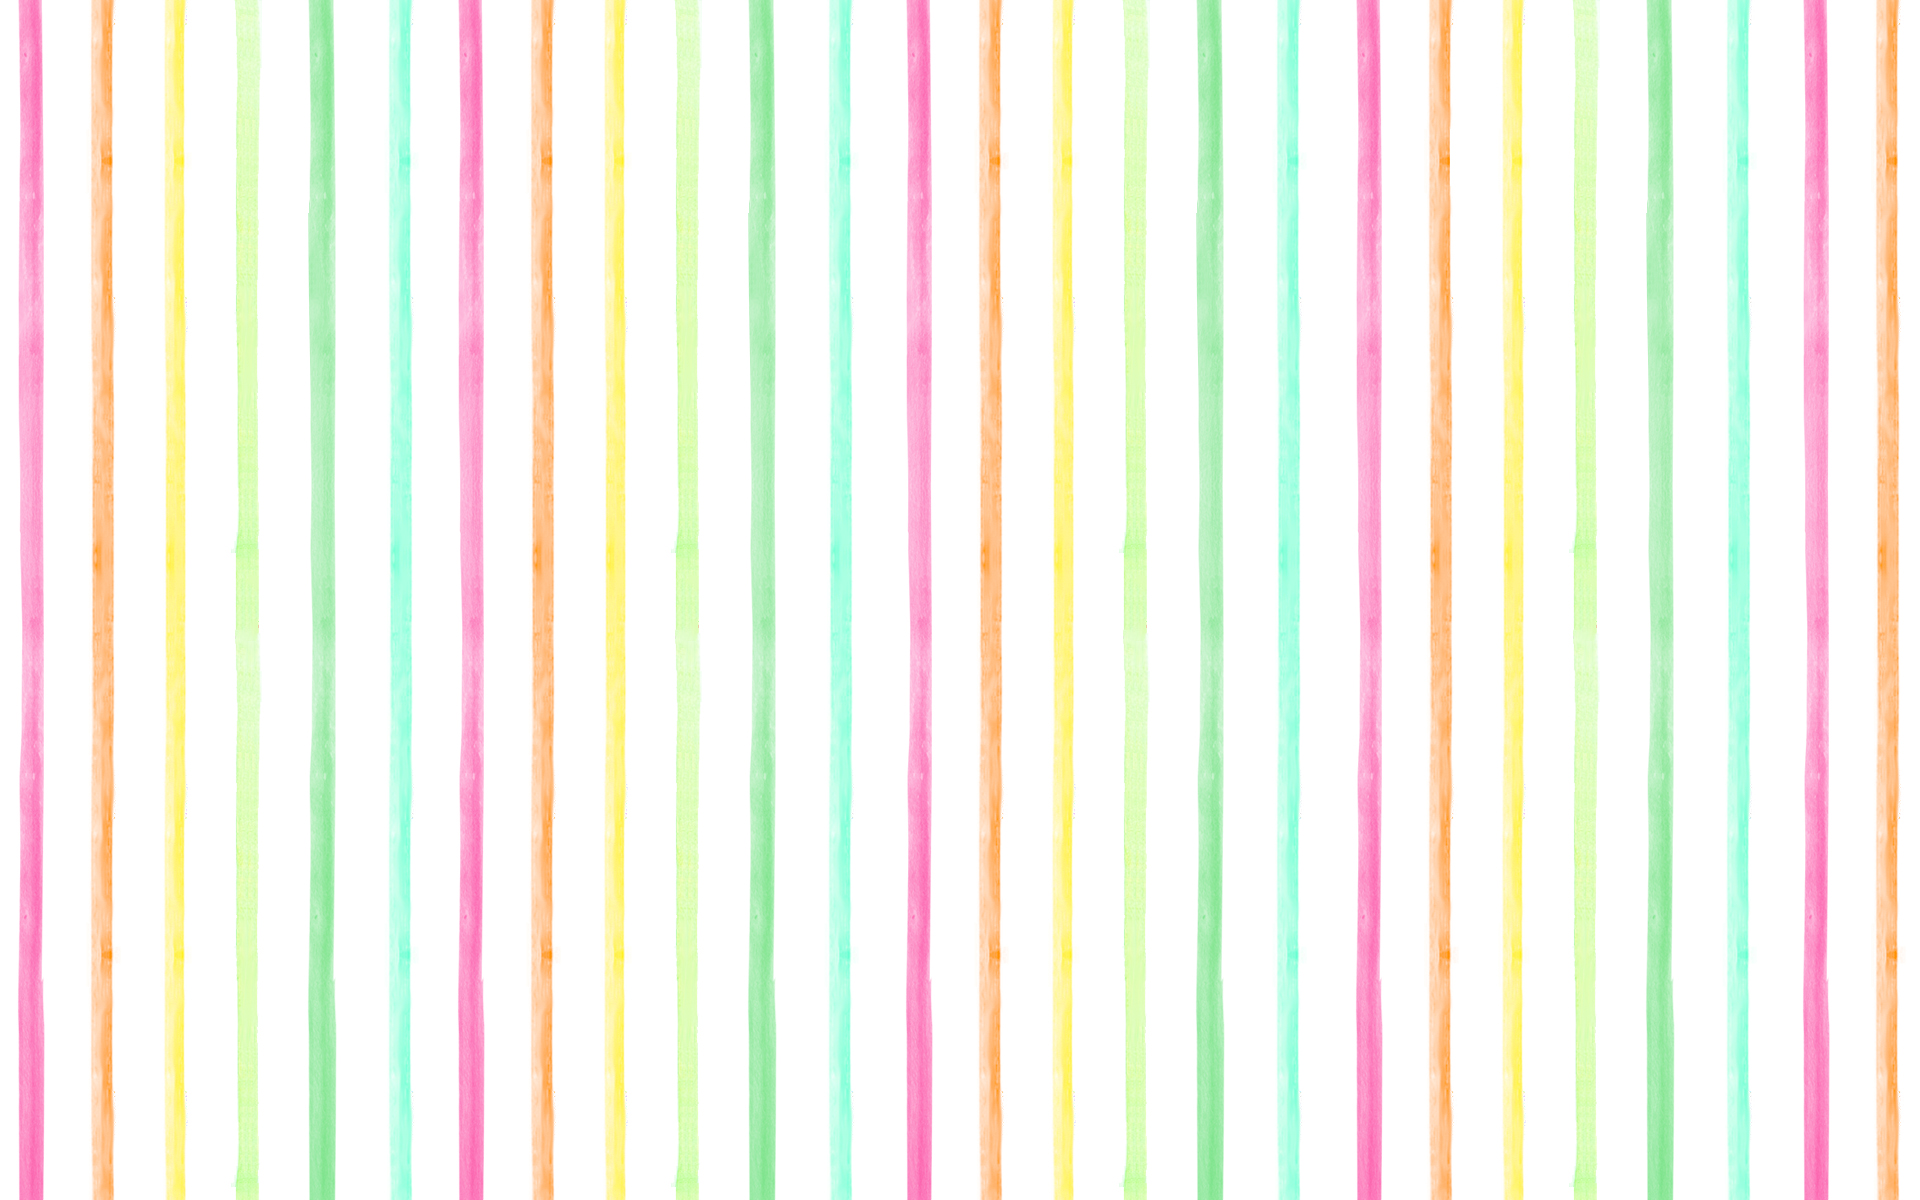 bset collection of striped image